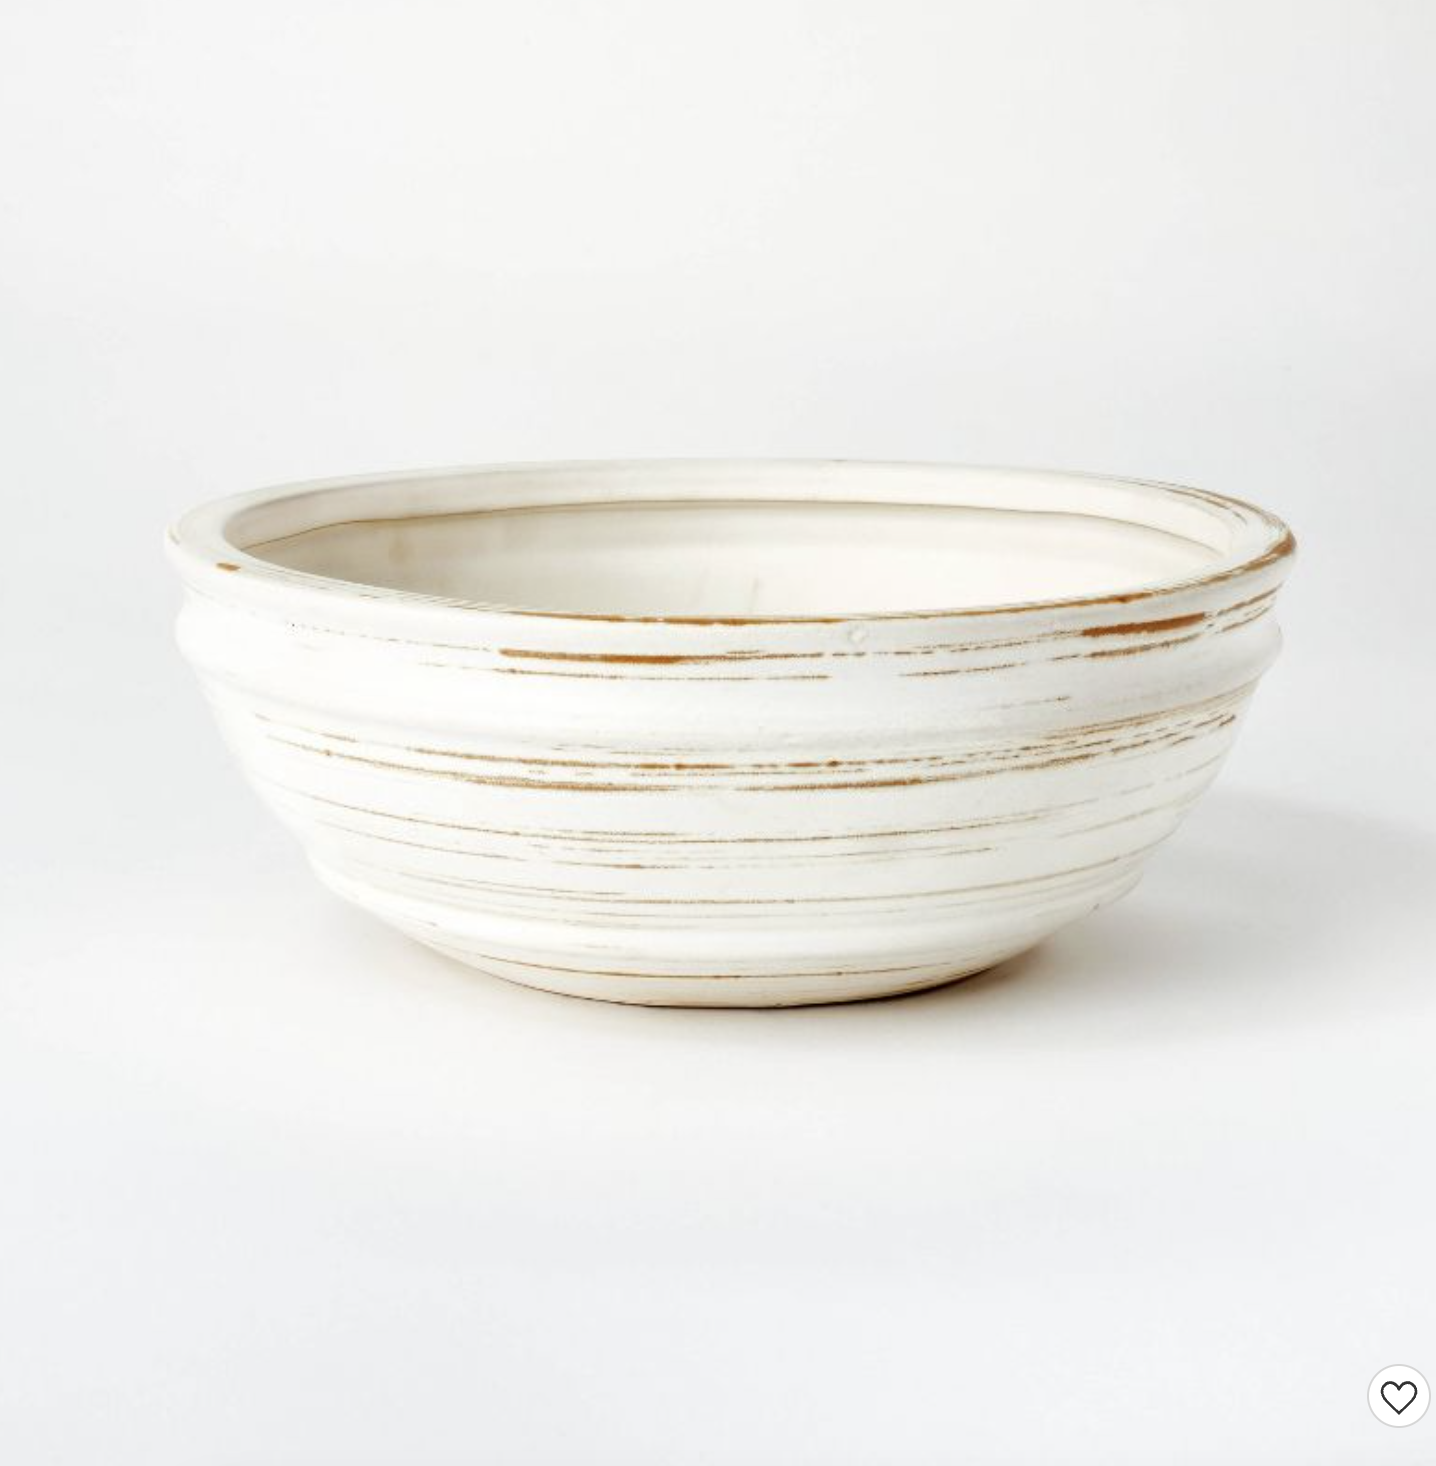 Bowl with washed, textured appearance